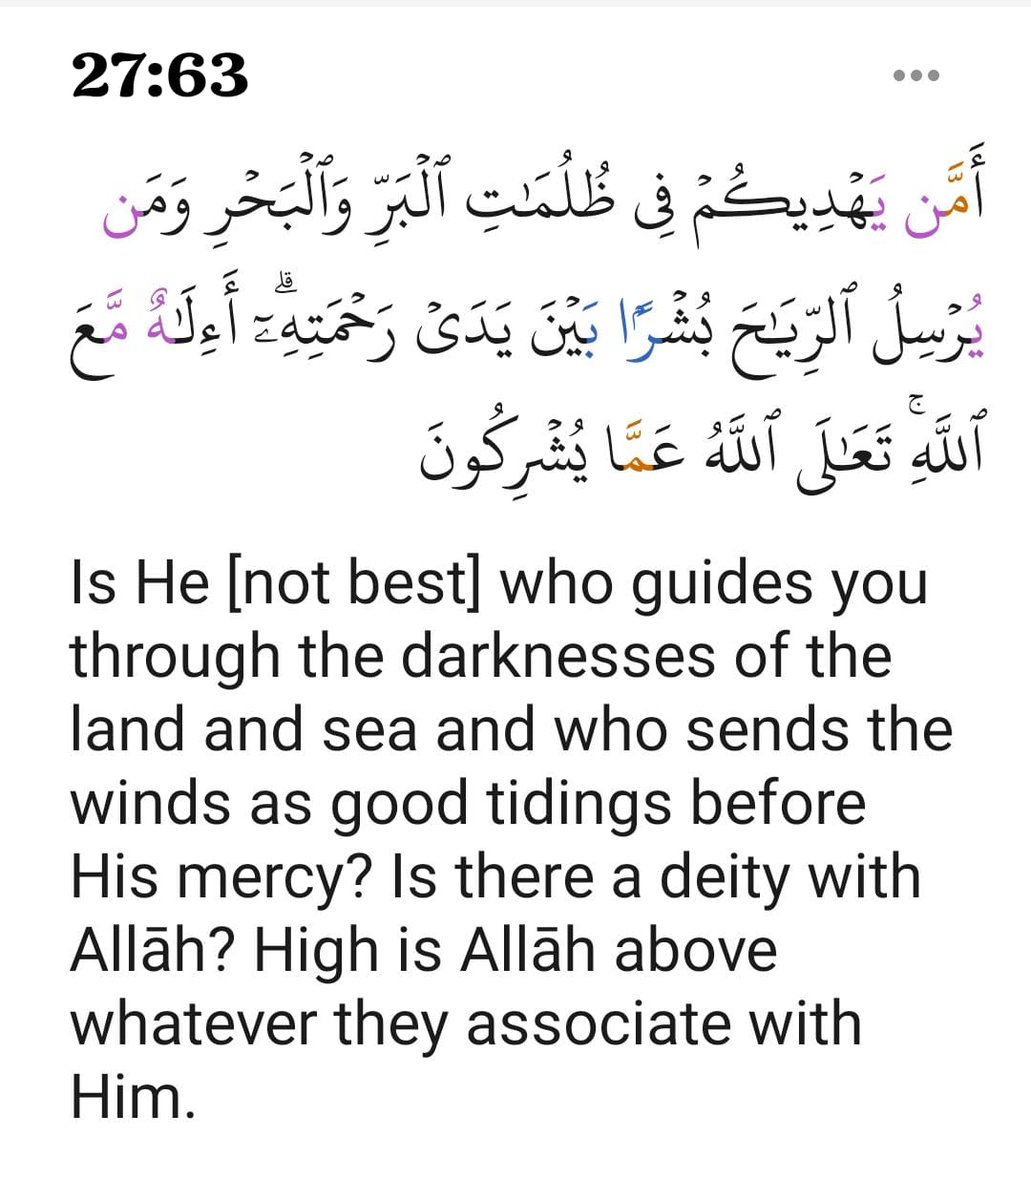 Is He [not best] who guides you through the darknesses of the land and sea and who sends the winds as good tidings before His mercy? Is there a deity with Allāh? High is Allāh above whatever they associate with Him.

#DailyQuran #Quran #Ayat #Read #Daily #Surah An-Naml 27:63